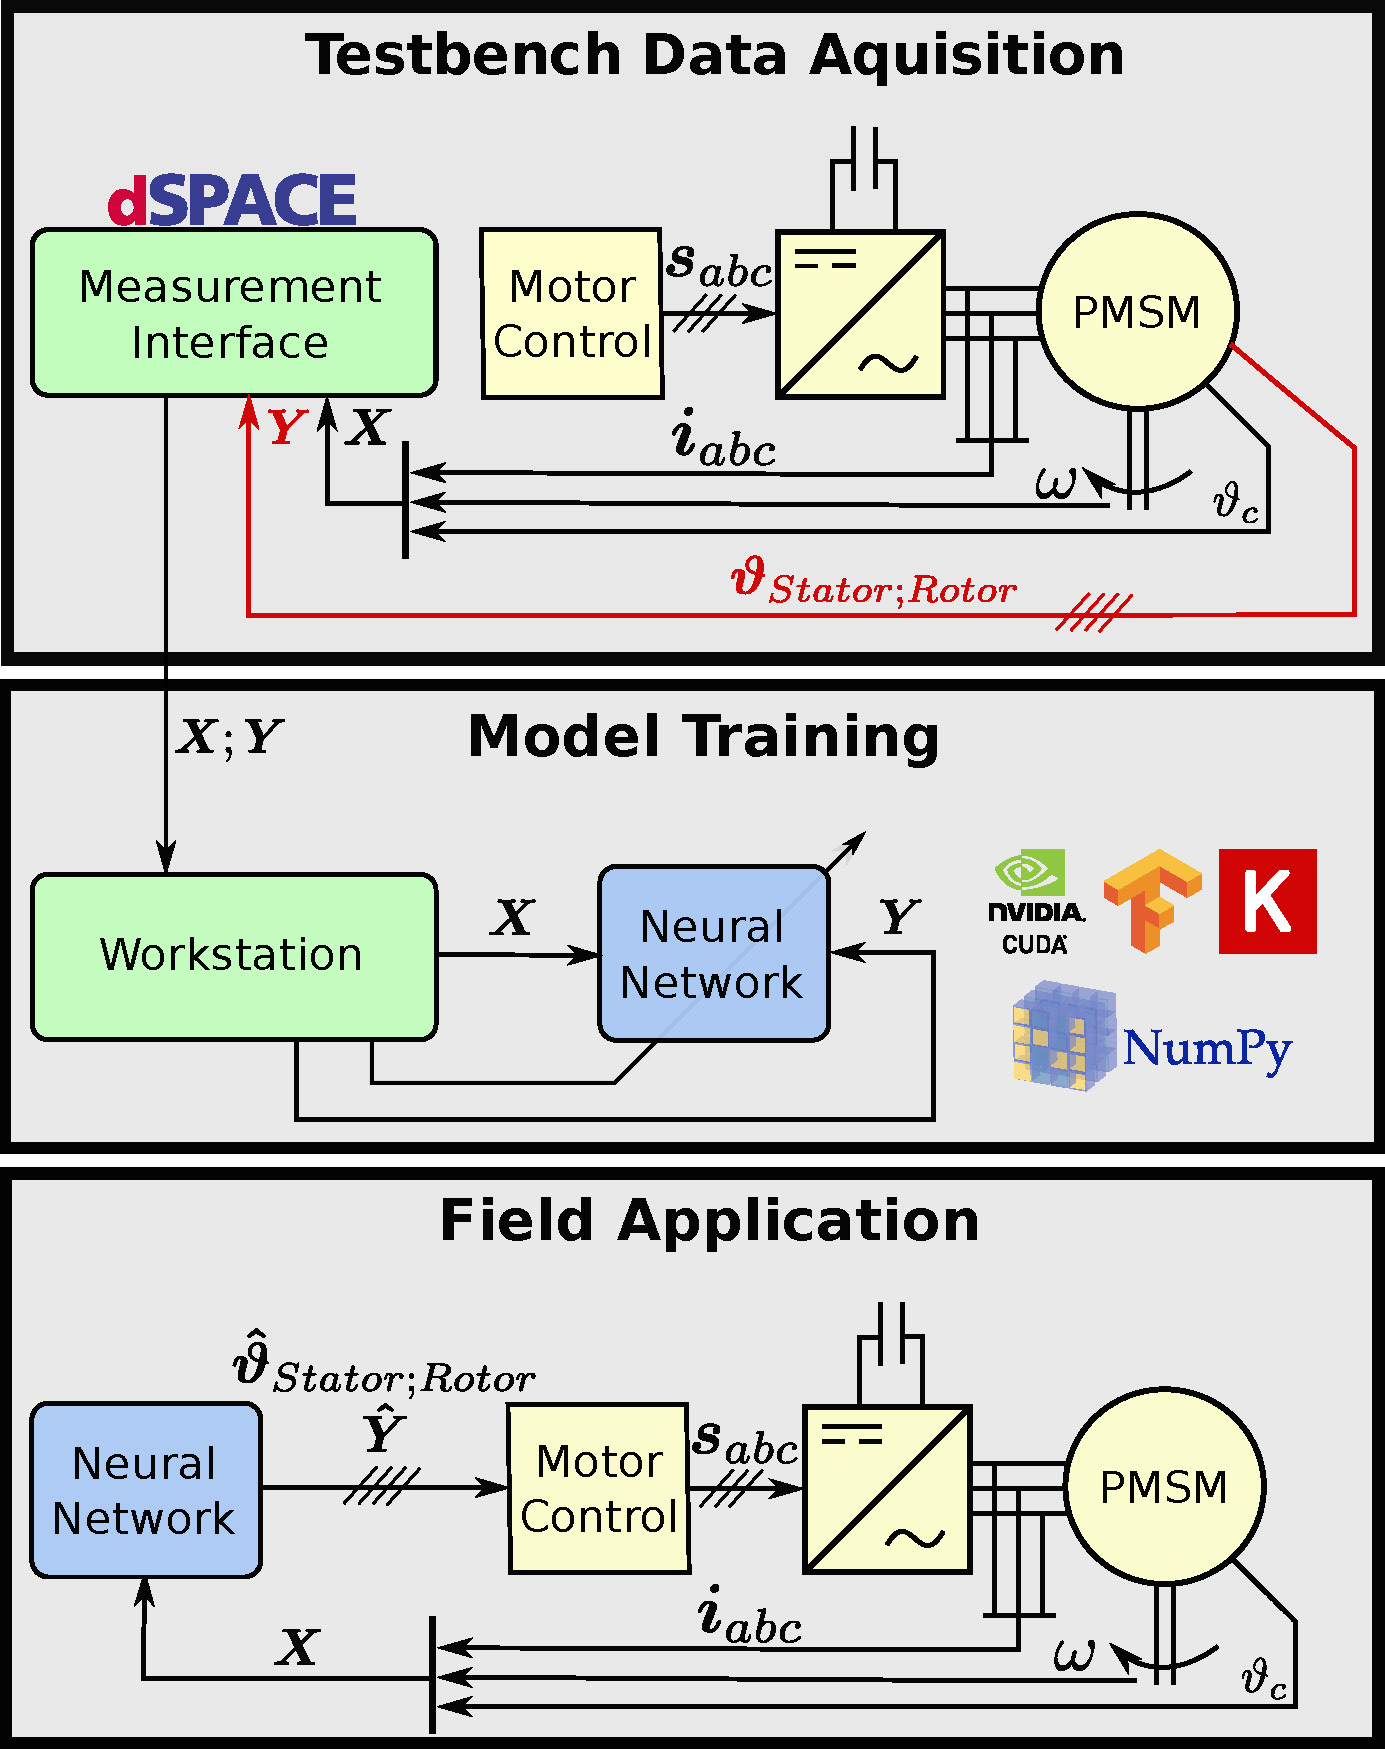 Simplified scheme of the entire process from data acquisition at the test bench over model training up to the applied temperature monitoring in the field.